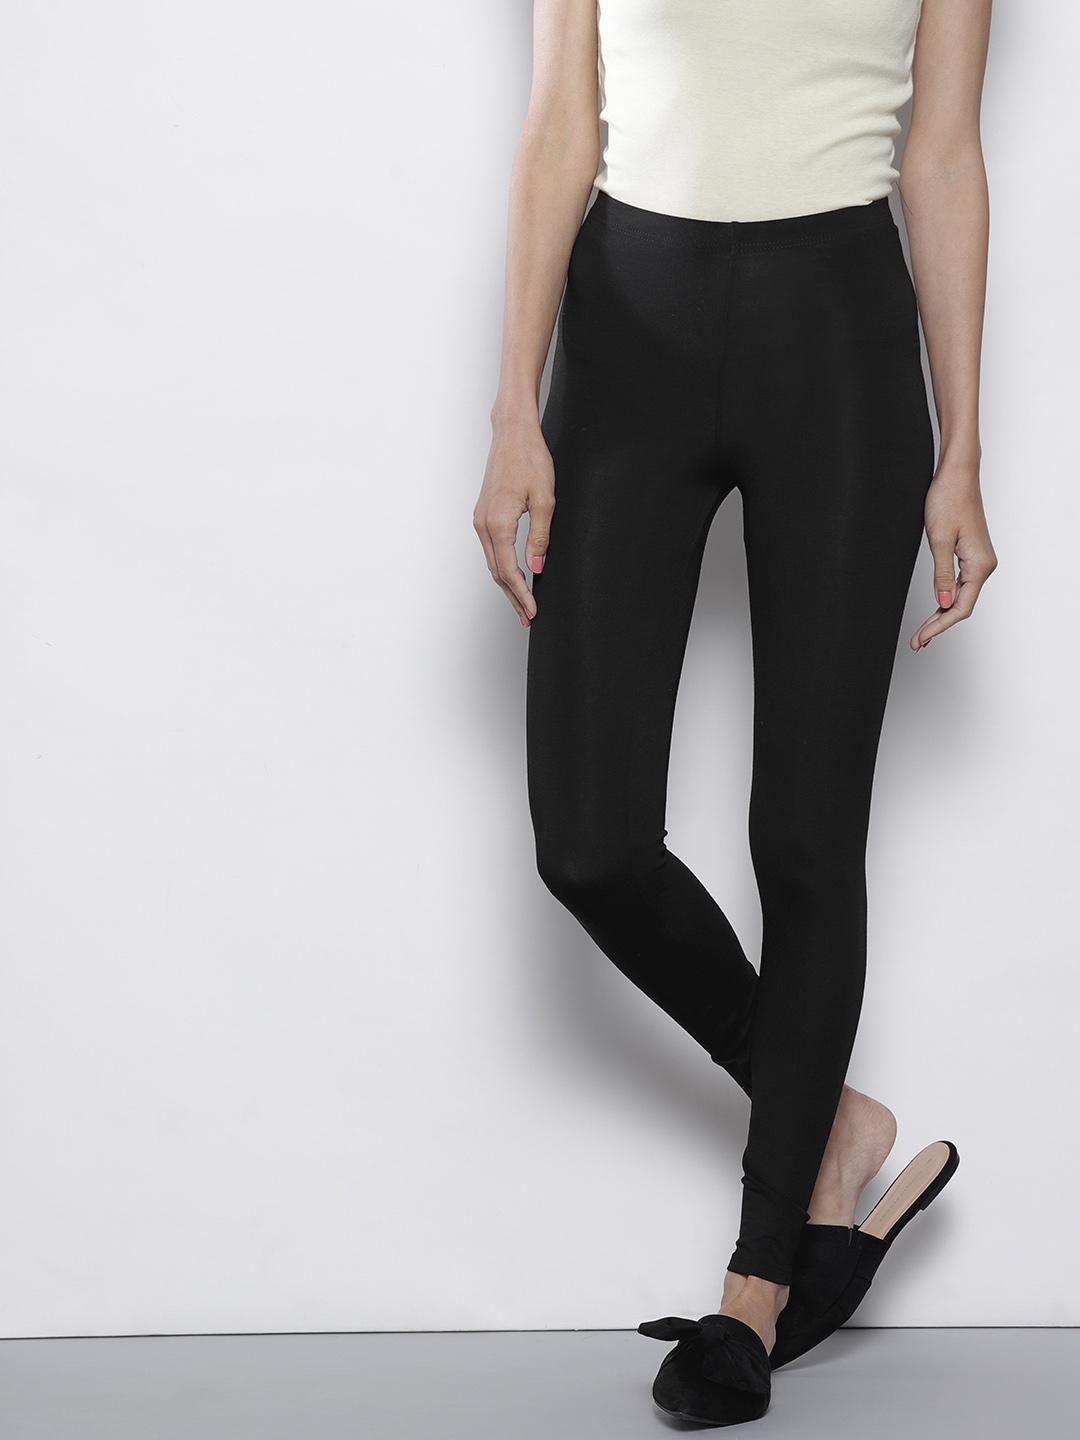 dorothy perkins leather pants